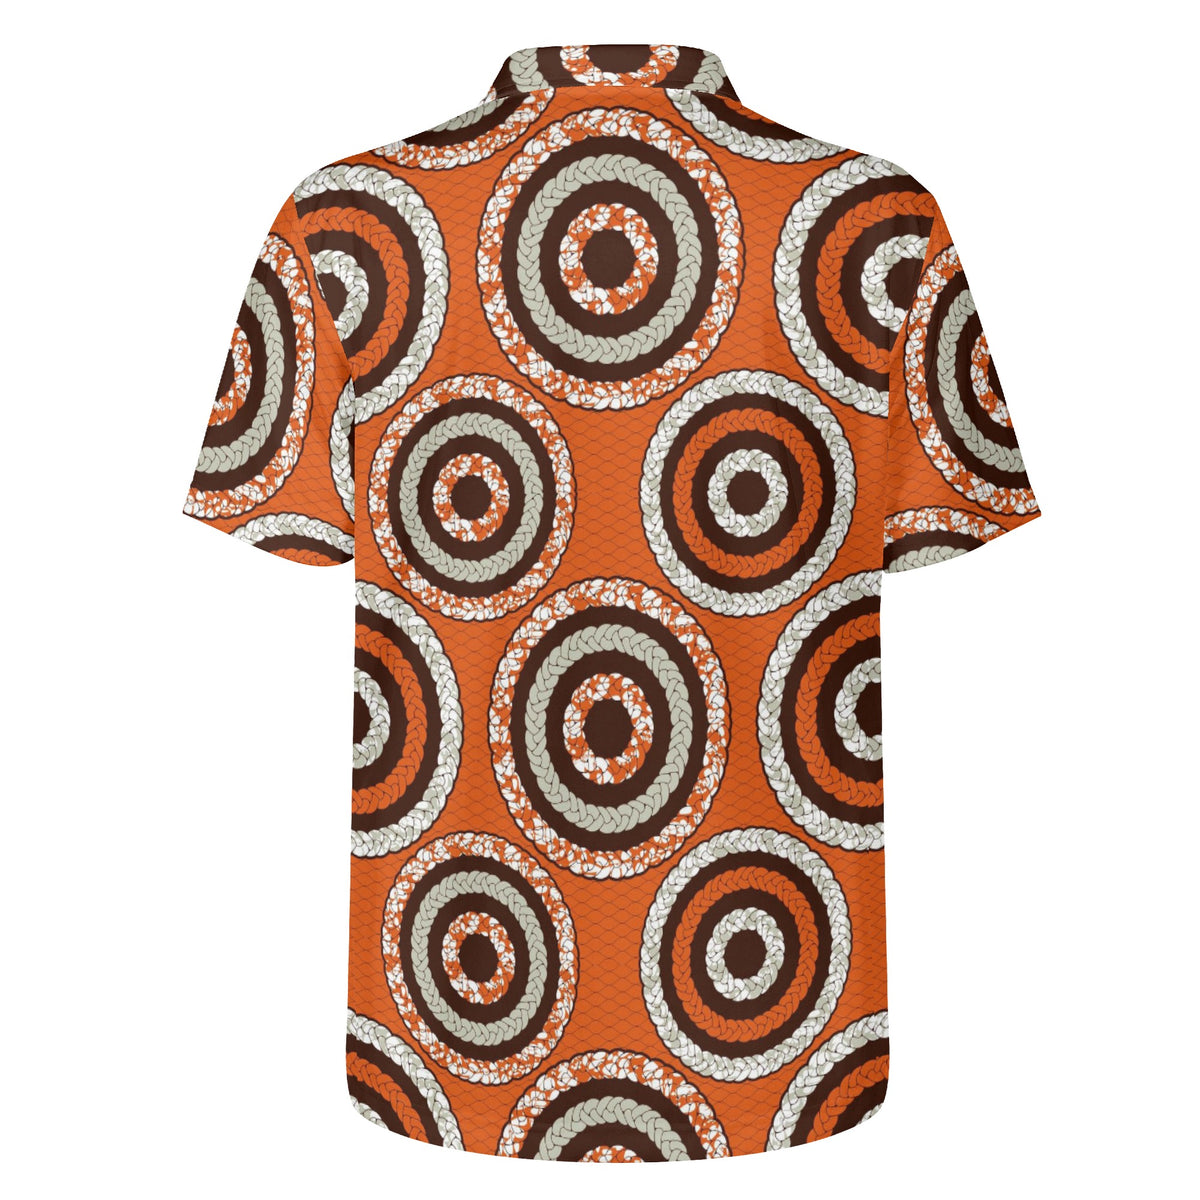 Dark Slate Gray Polo Shirt with African Ankara prints in vibrant colors Sumbu_African_Prints_and_Designs